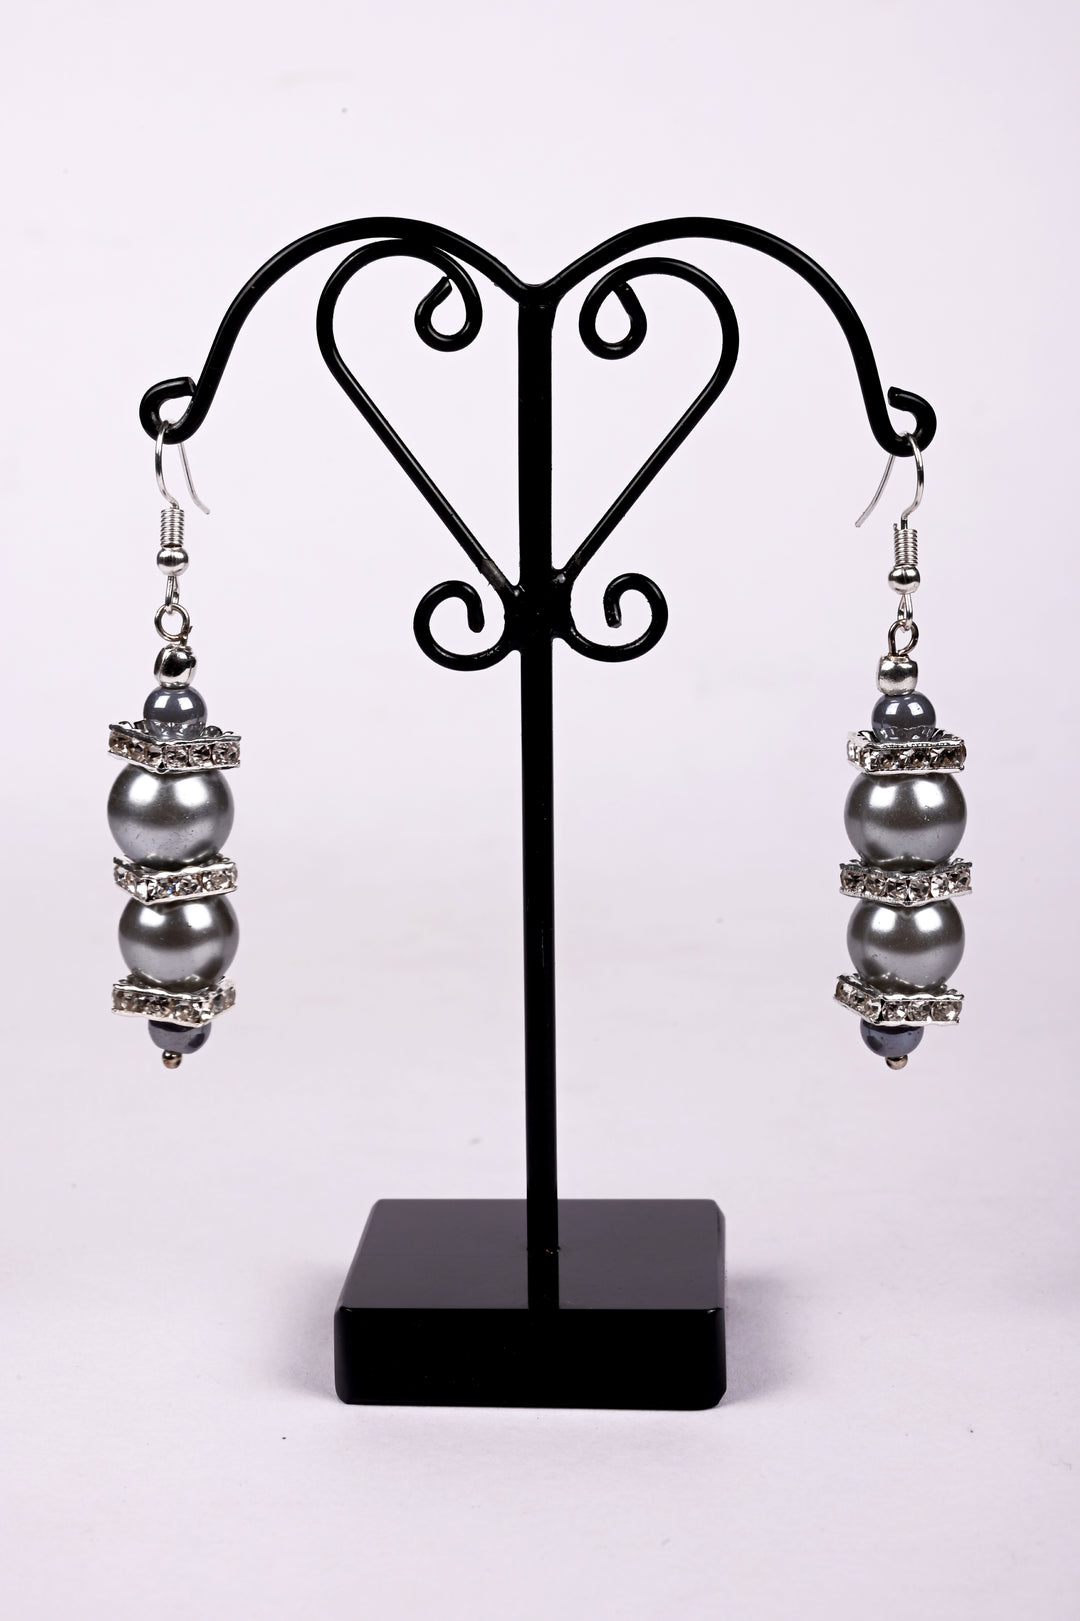 Grey Pearl Beads Earring Styled With Metal Charms With Glass Beads In It